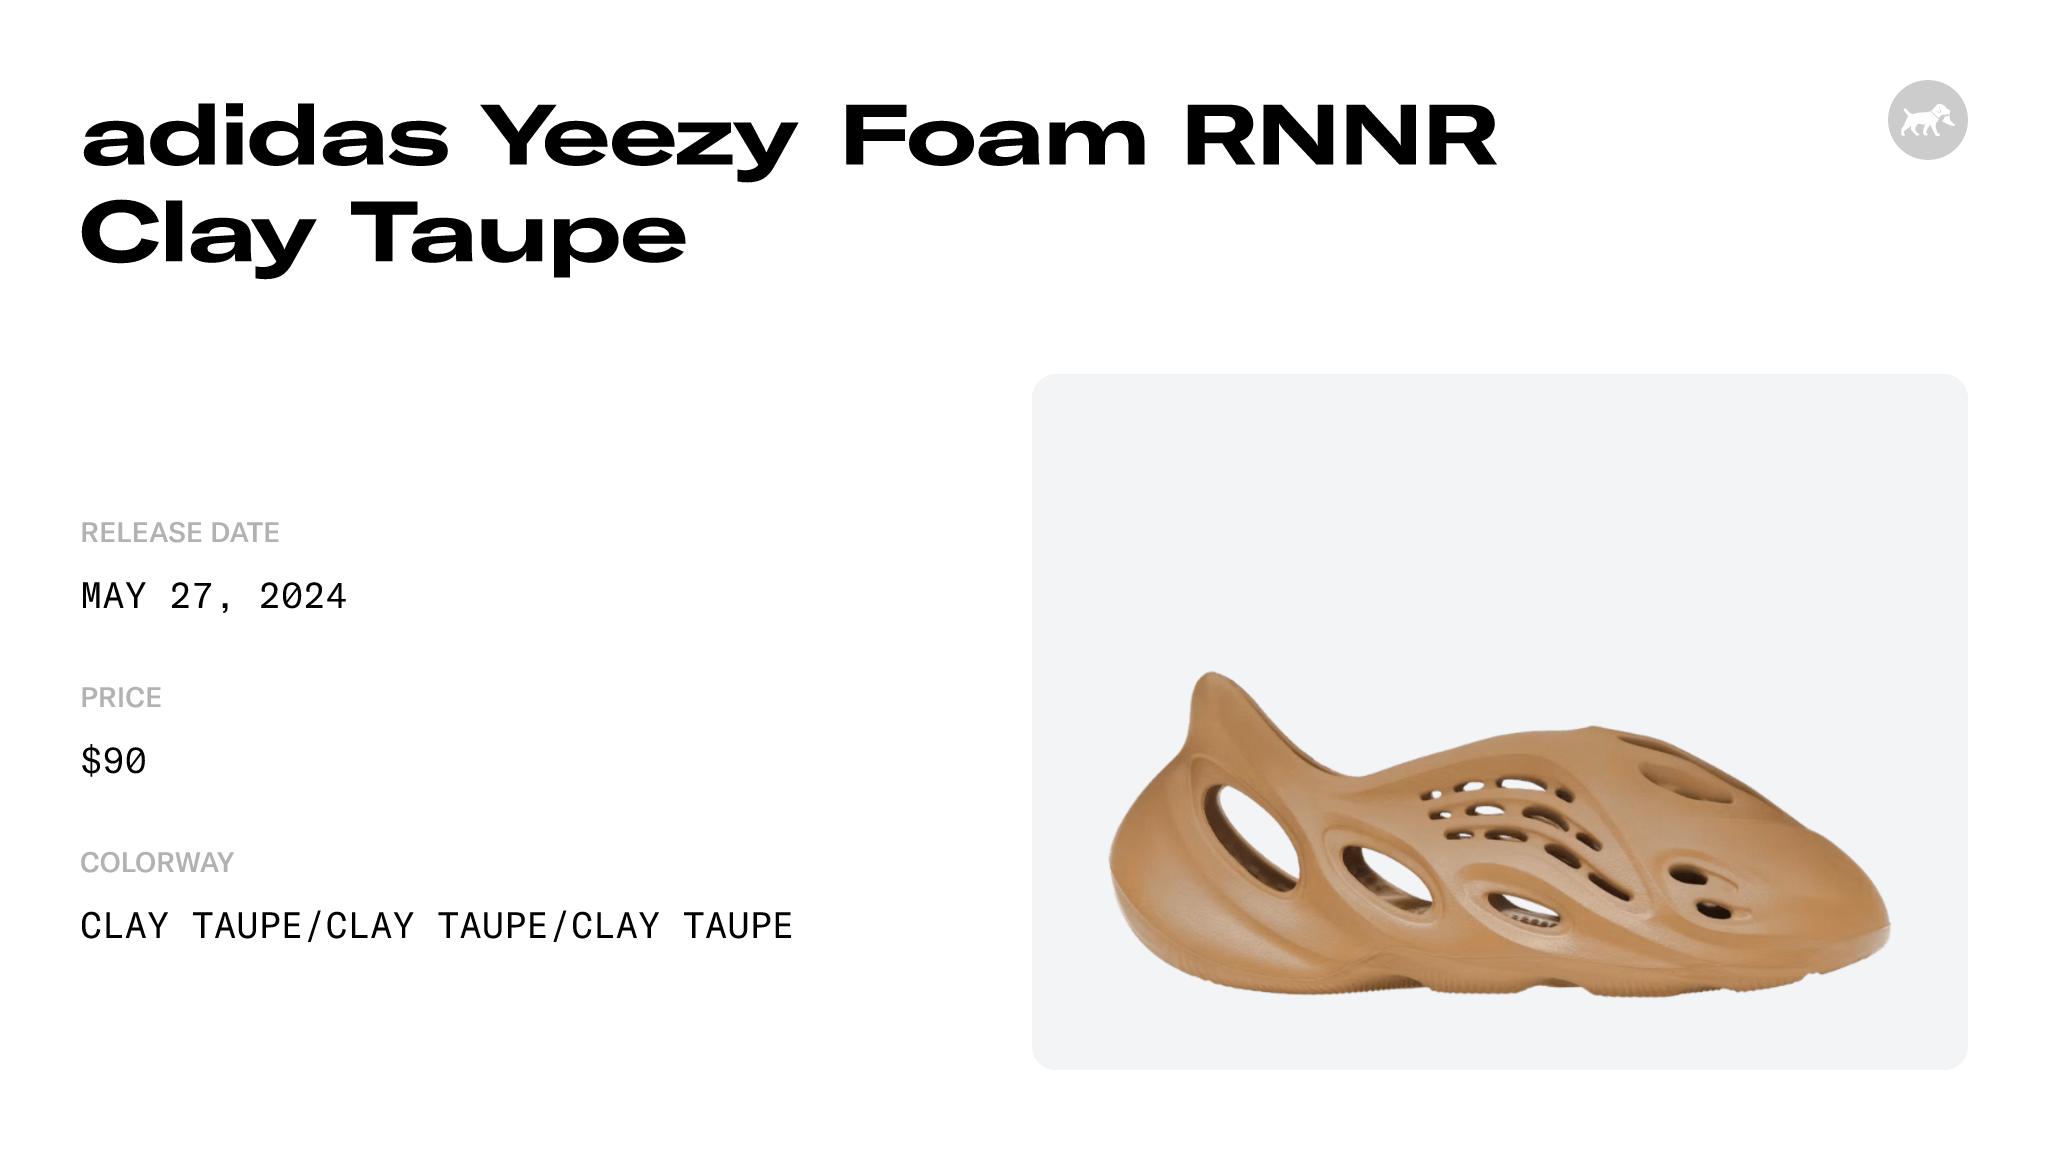 adidas Yeezy Foam RNNR Clay Taupe - GV6842 Raffles and Release Date